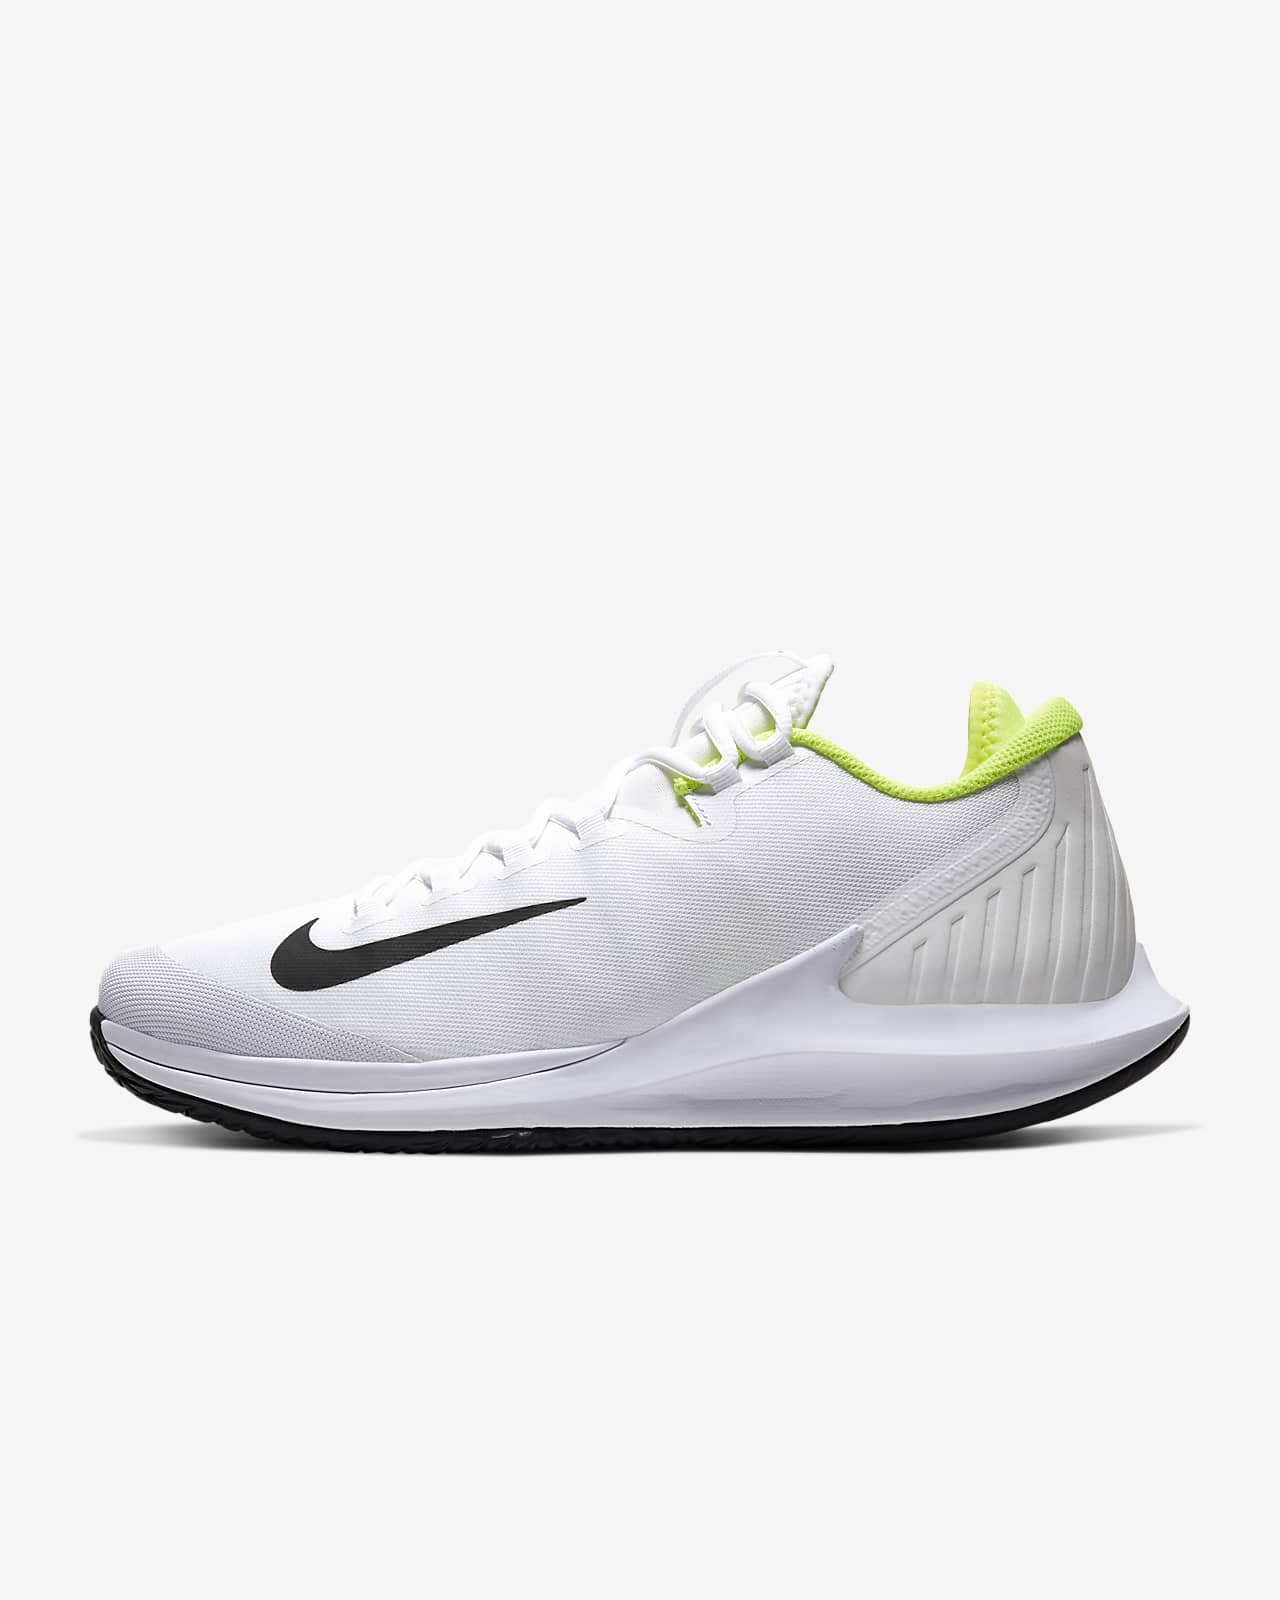 court shoes nike